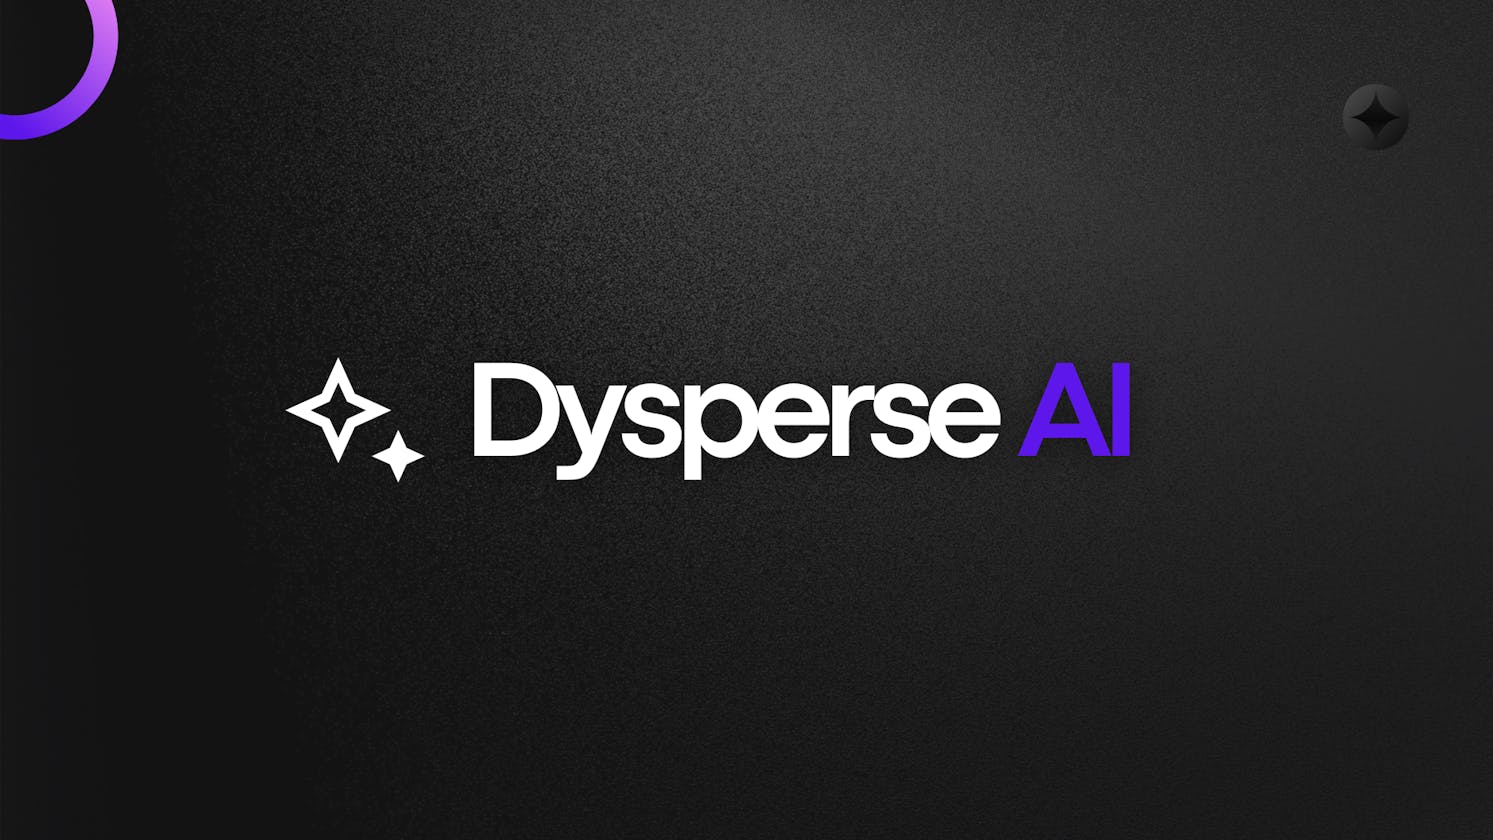 Introducing Dysperse AI